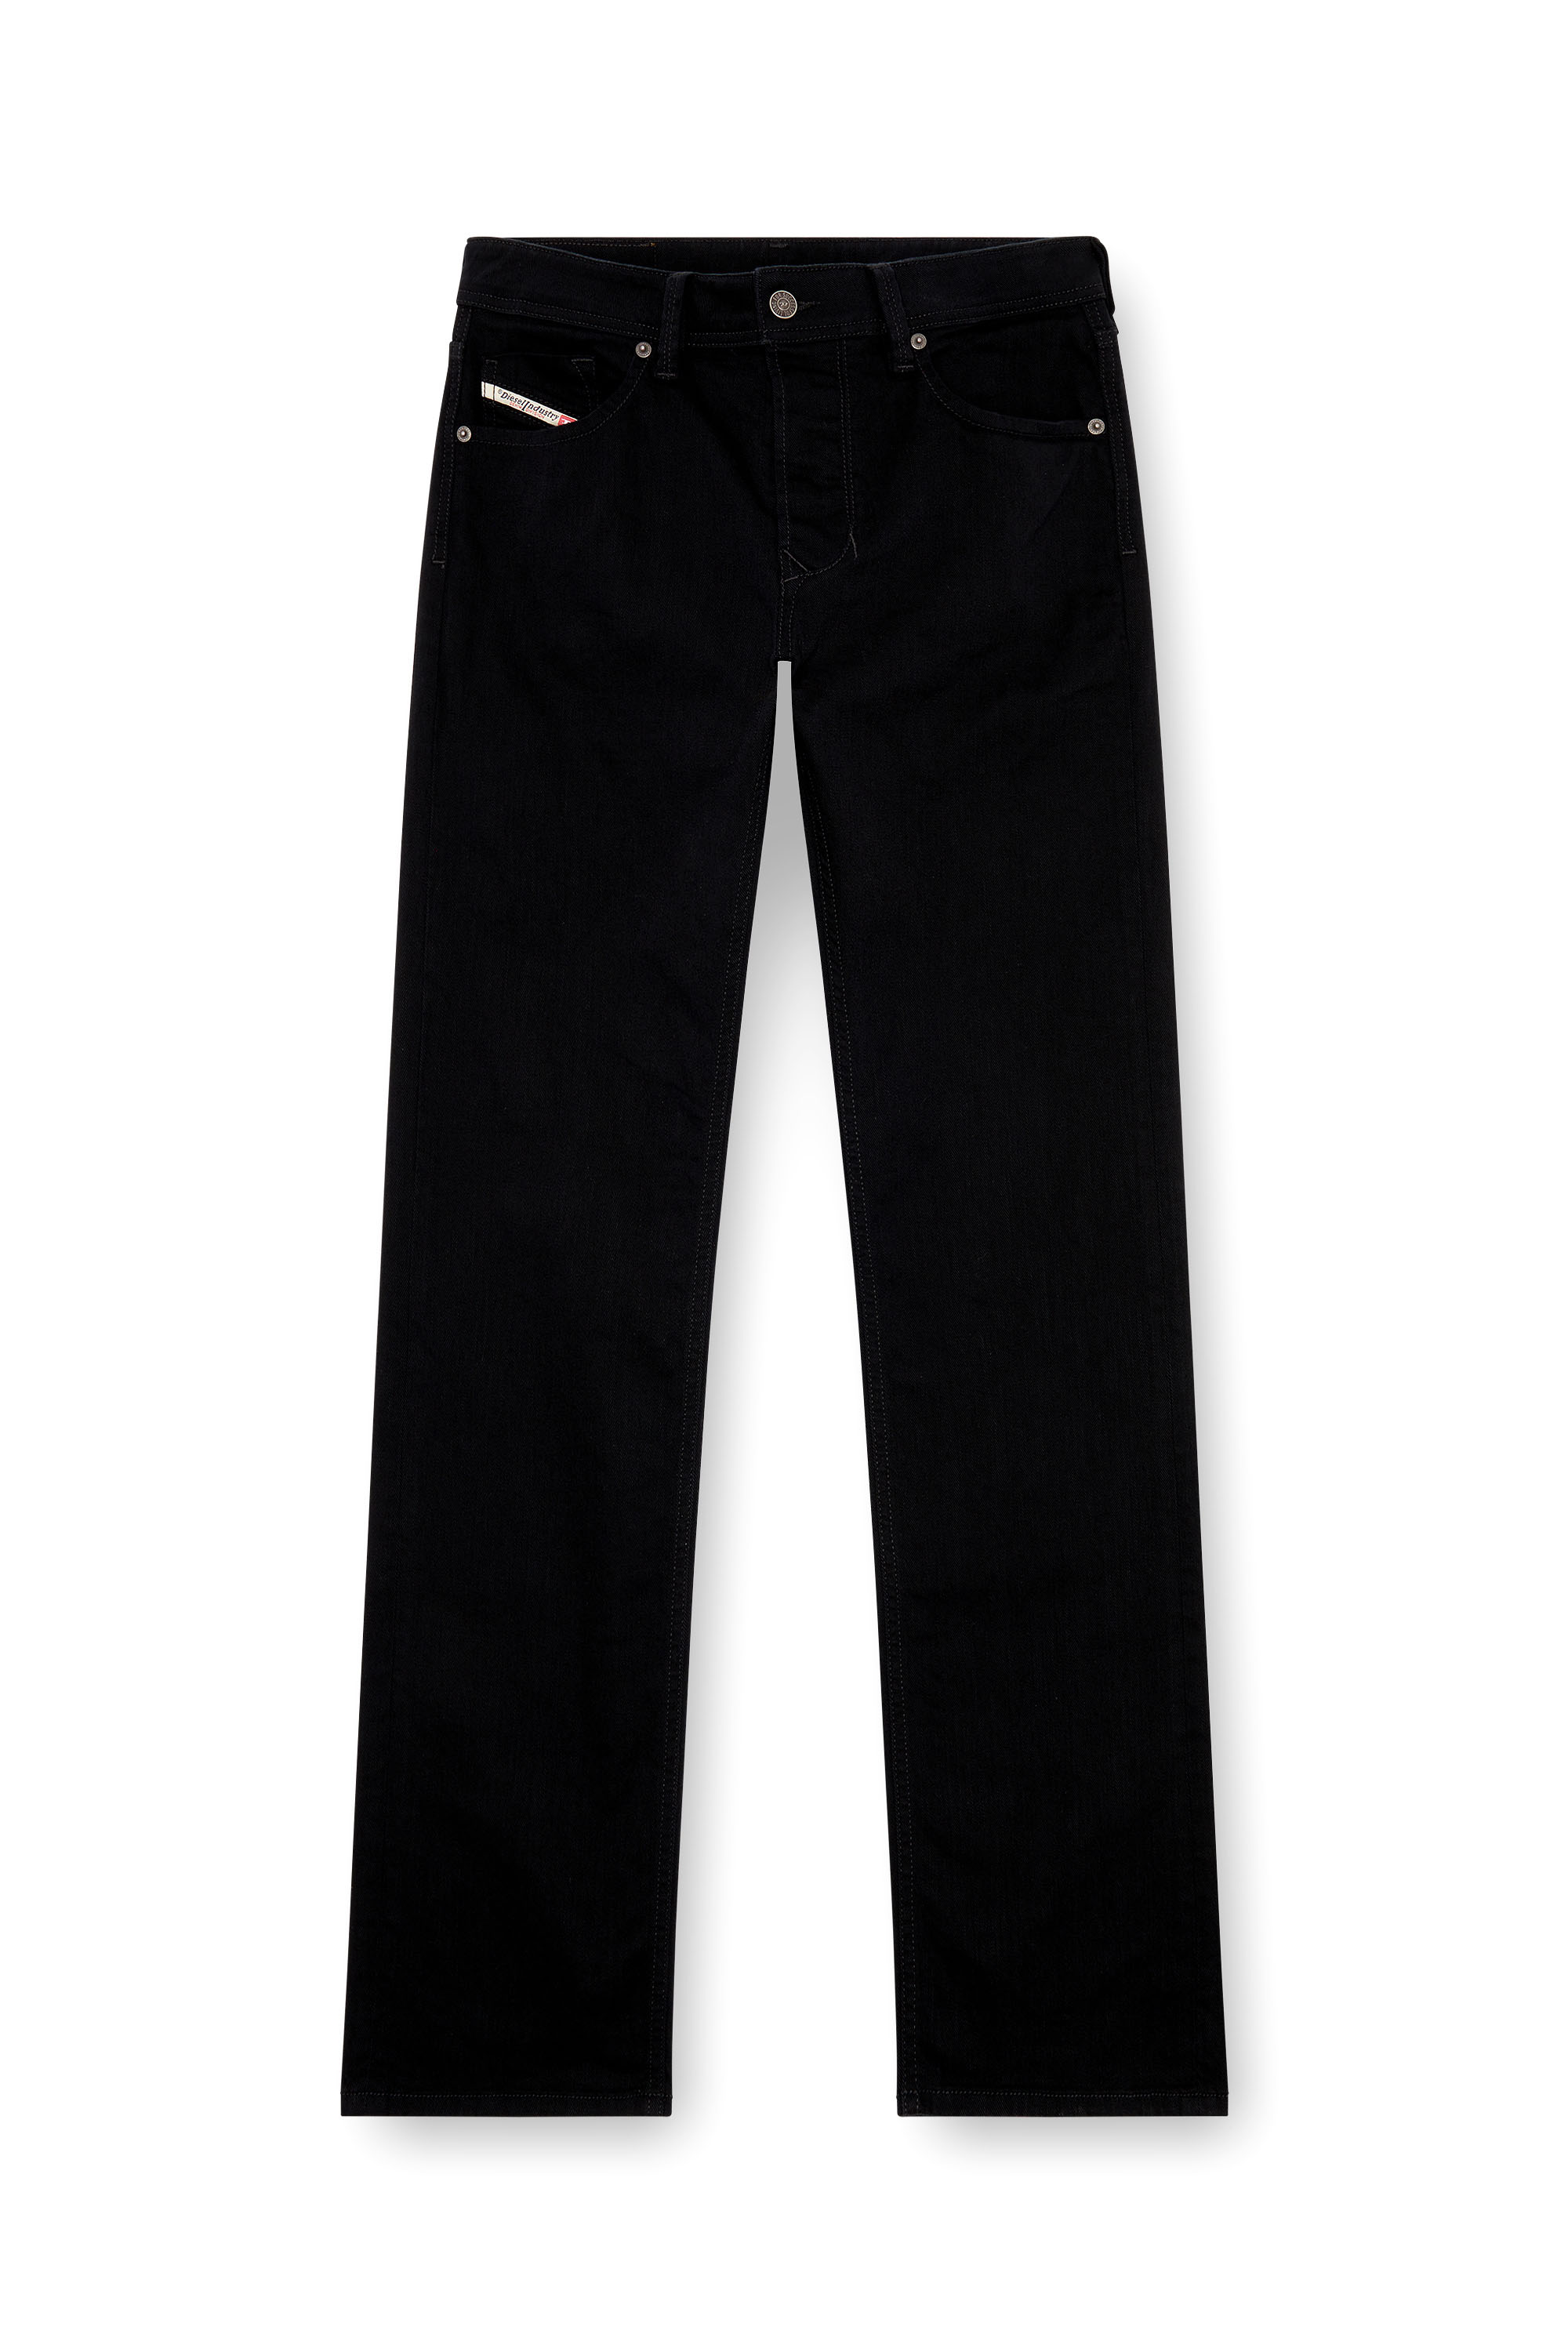 Diesel - Straight Jeans 1985 Larkee 0688H, Hombre Straight Jeans - 1985 Larkee in Negro - Image 5